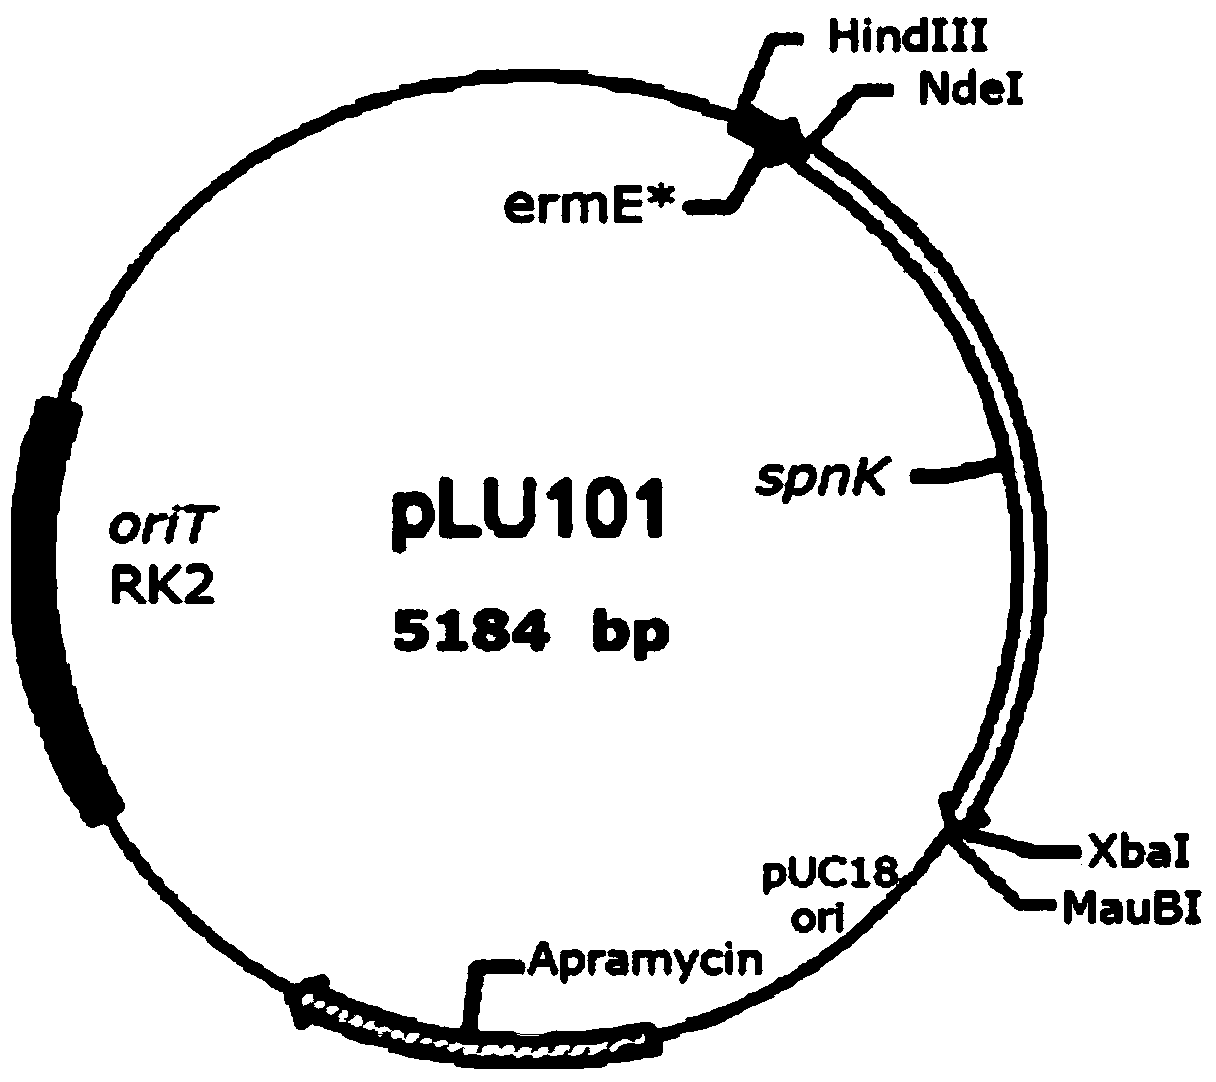 Genetically engineered bacterium capable of increasing yield of spinosads as well as construction method and application